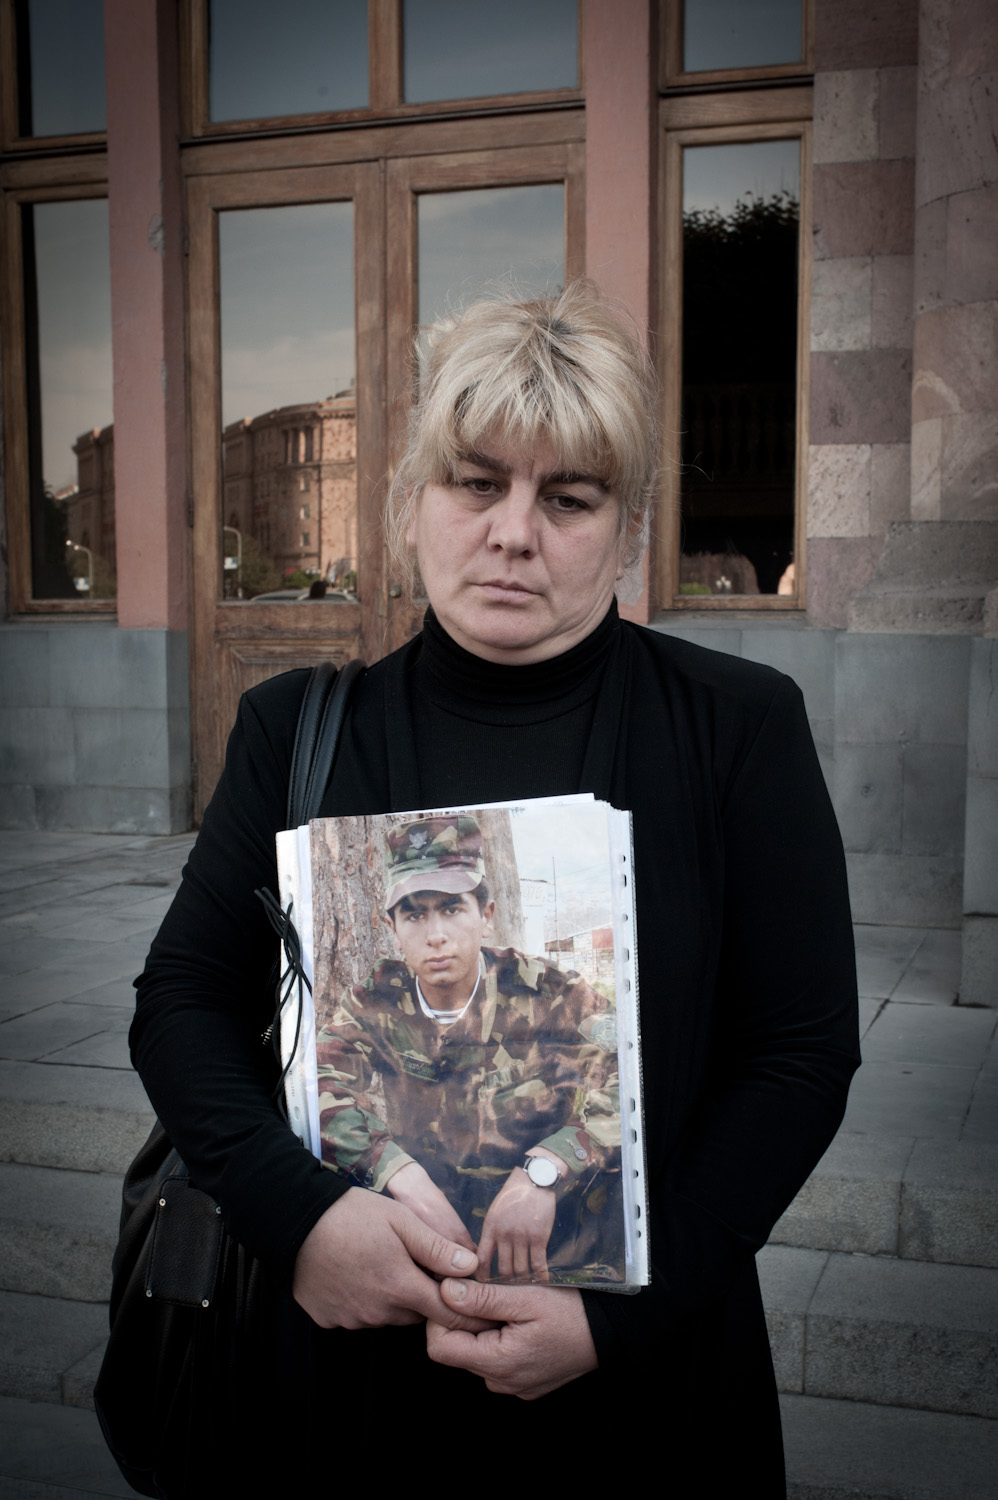  Irina Ghazaryan's son Arthur died in 2010 during his military service. The military contends that the nineteen year old died of a brain tumor. The Ghazaryans believe their son was killed.  